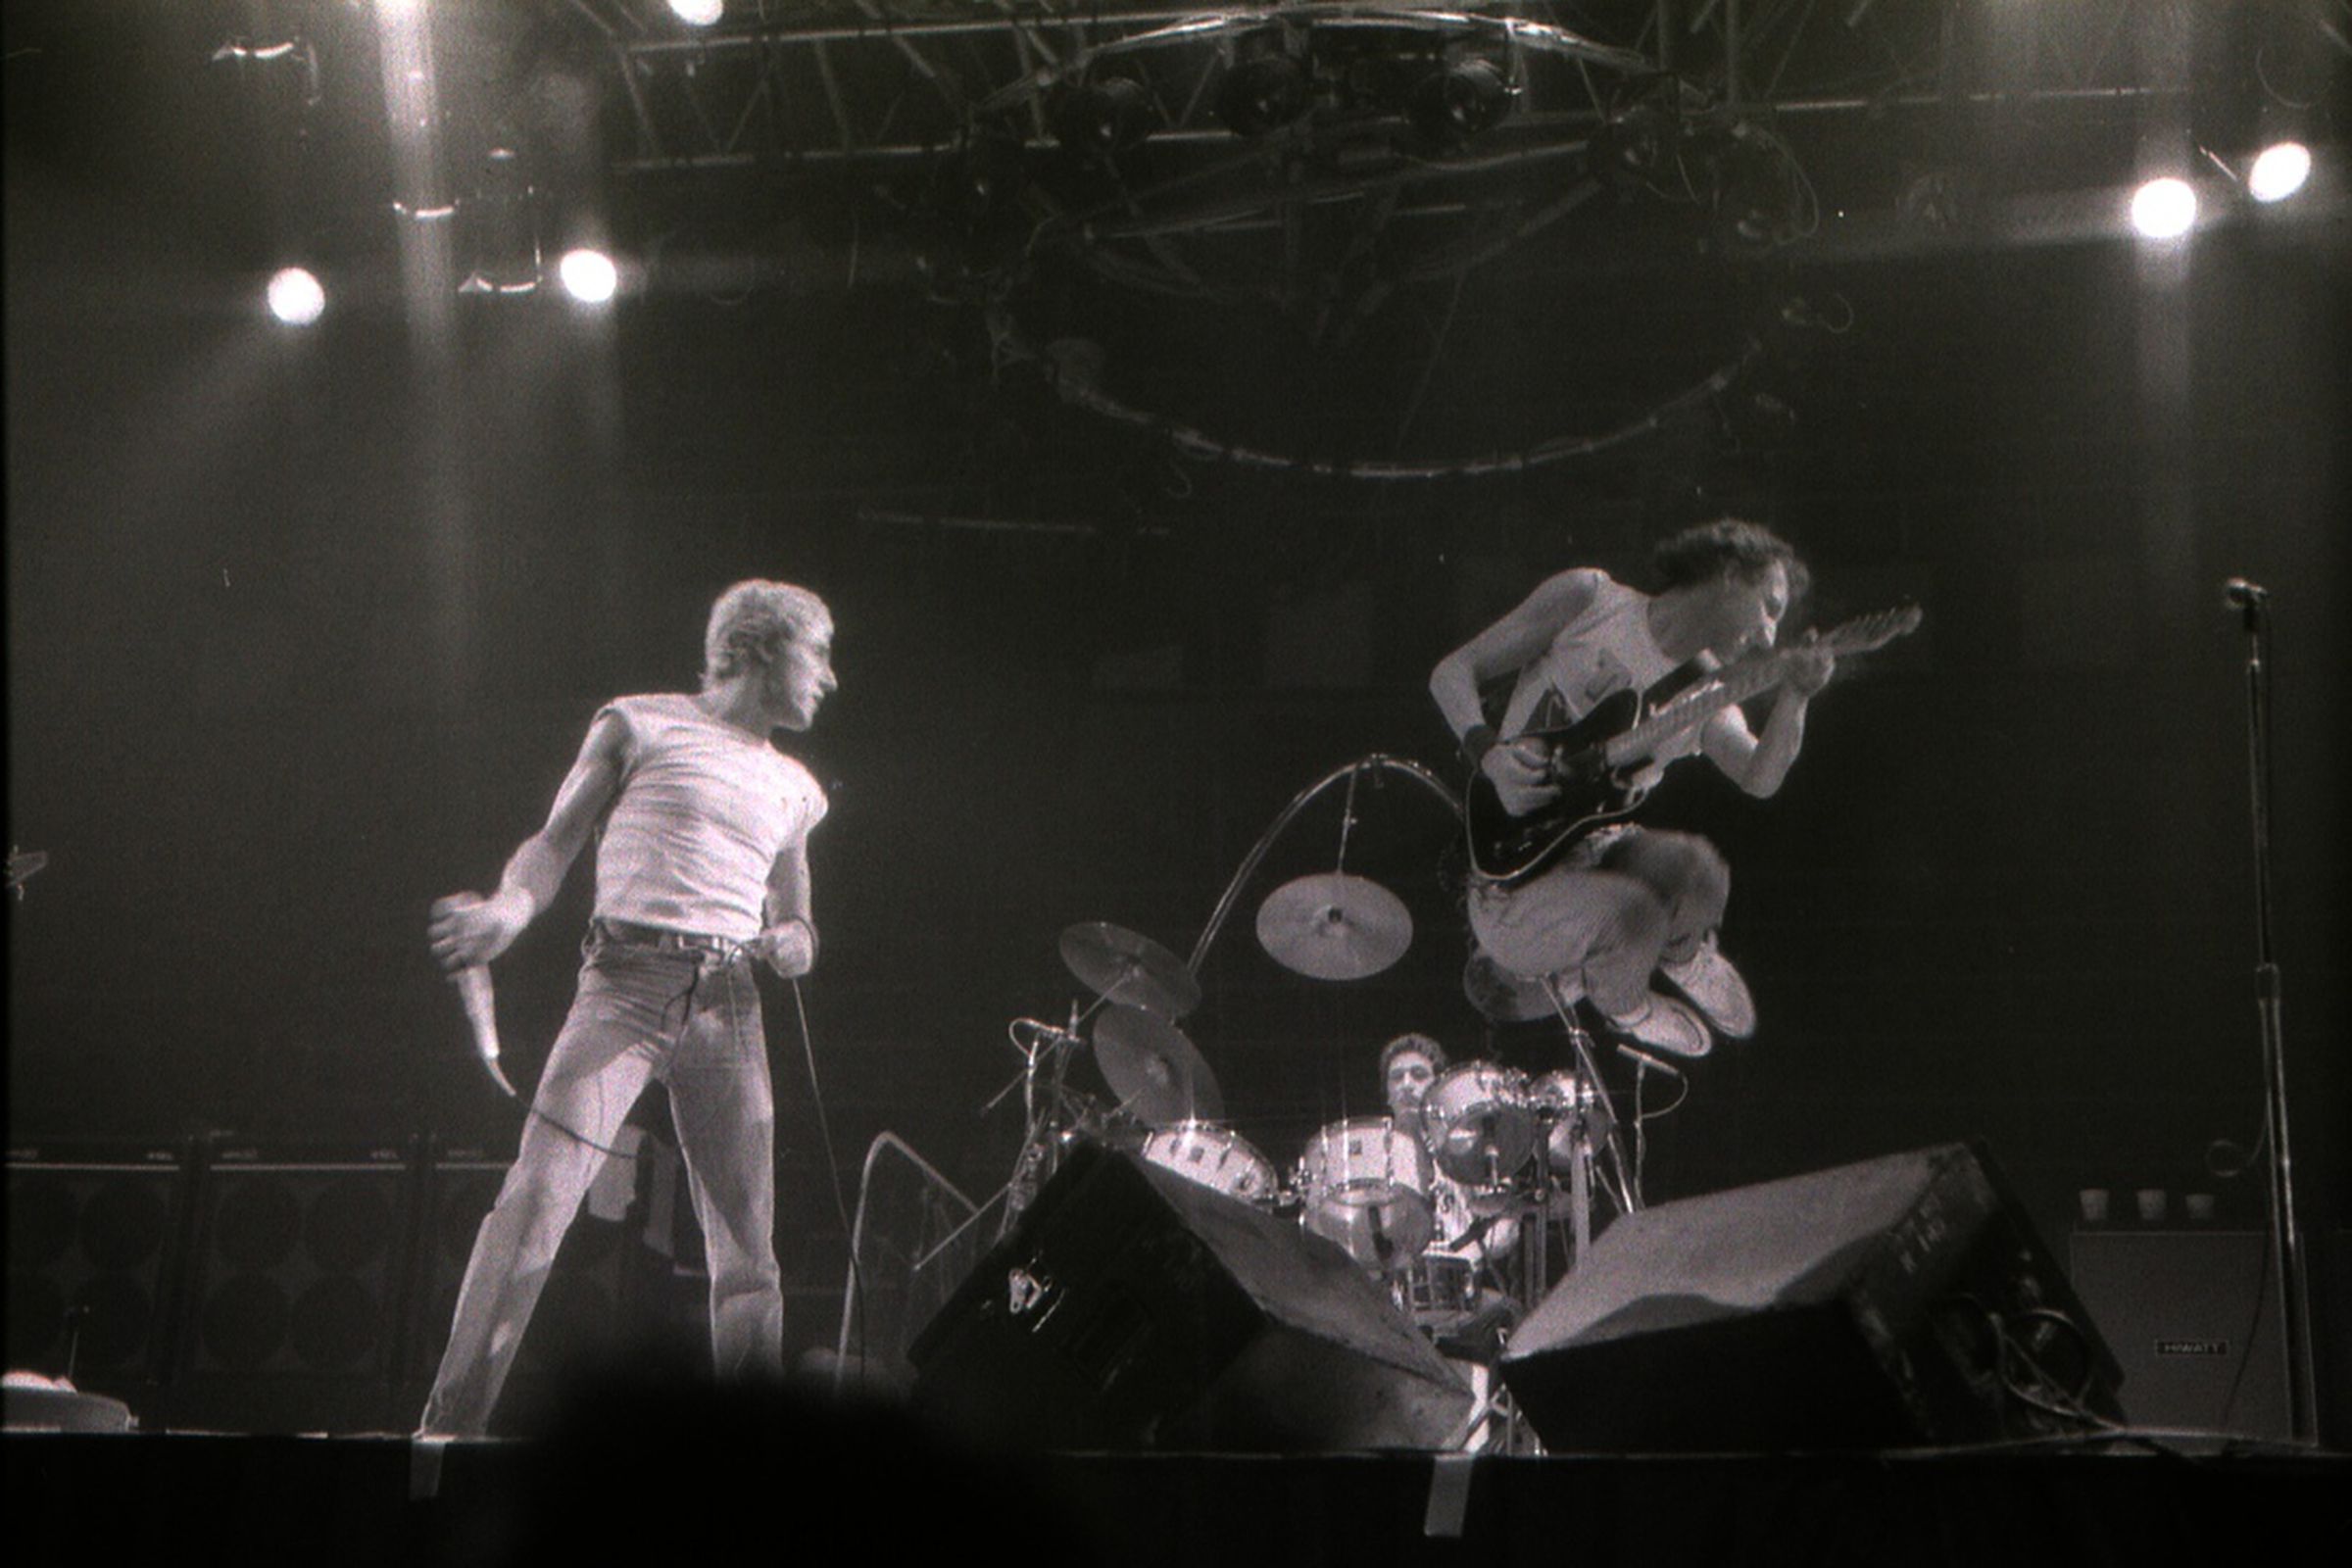 The Who, playing in Toronto on May 6th, 1980. They're one of many bands in the live music archives.